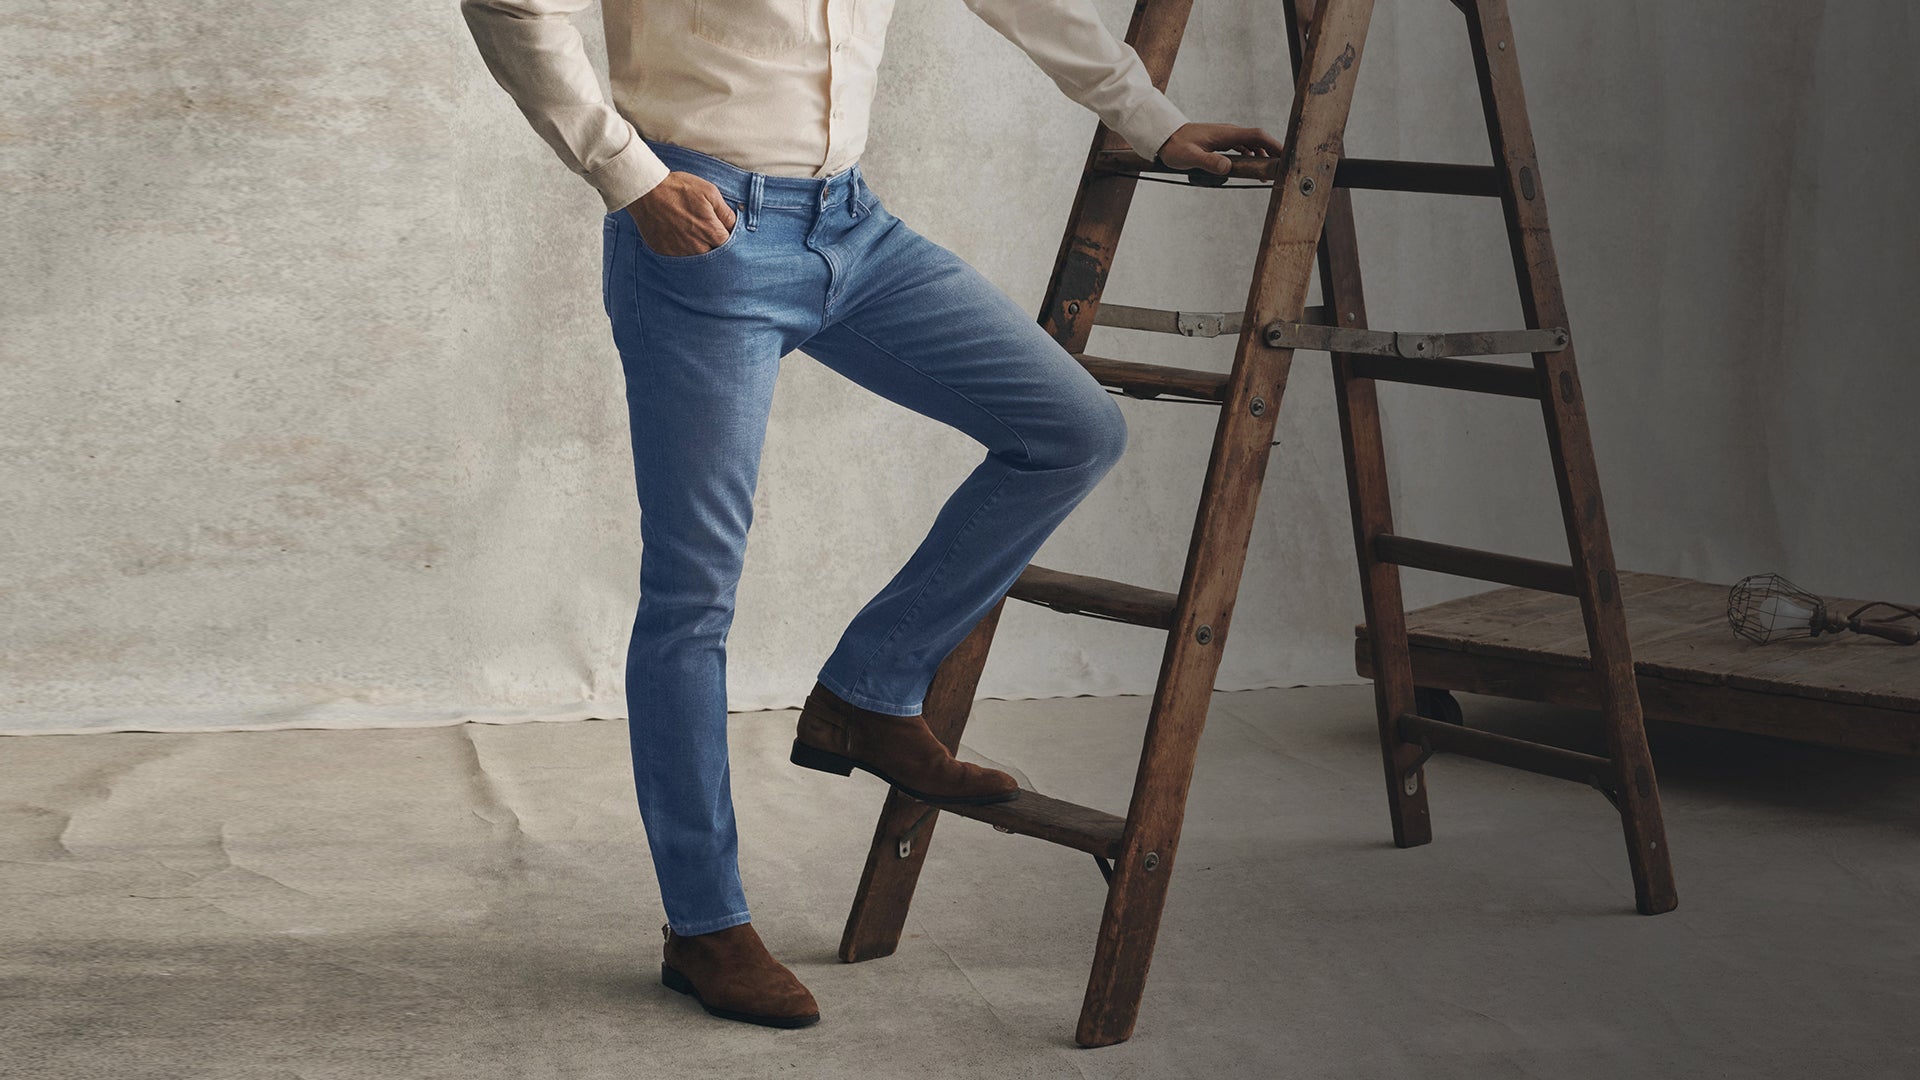 34 Heritage The Most Comfortable Men's Jeans